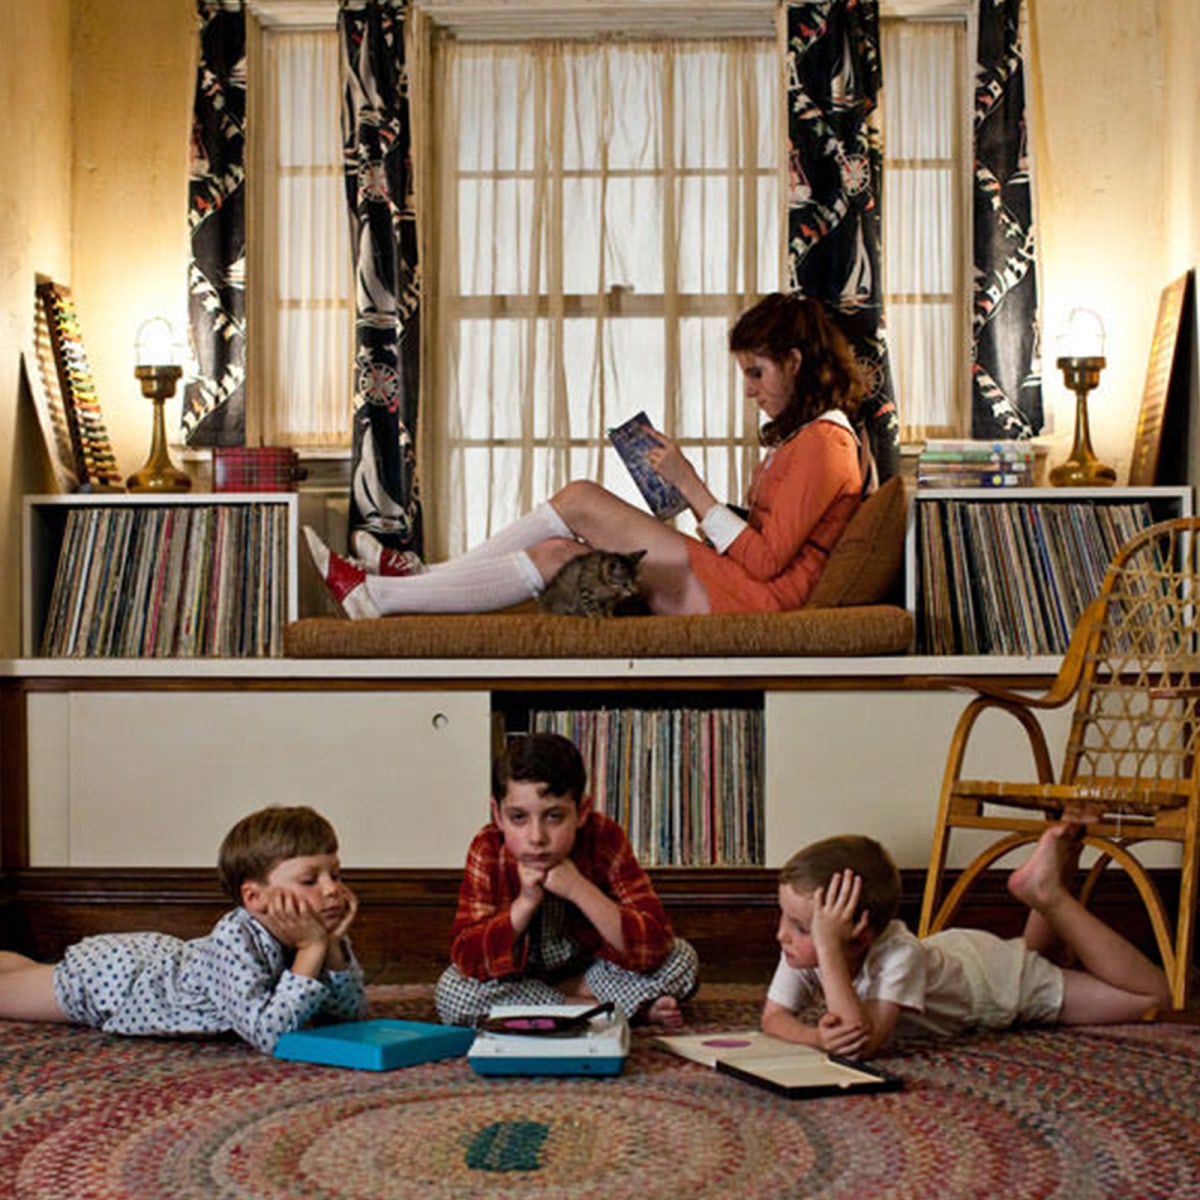 6 Wes Anderson Inspired TV Rooms Designed Like The Movies